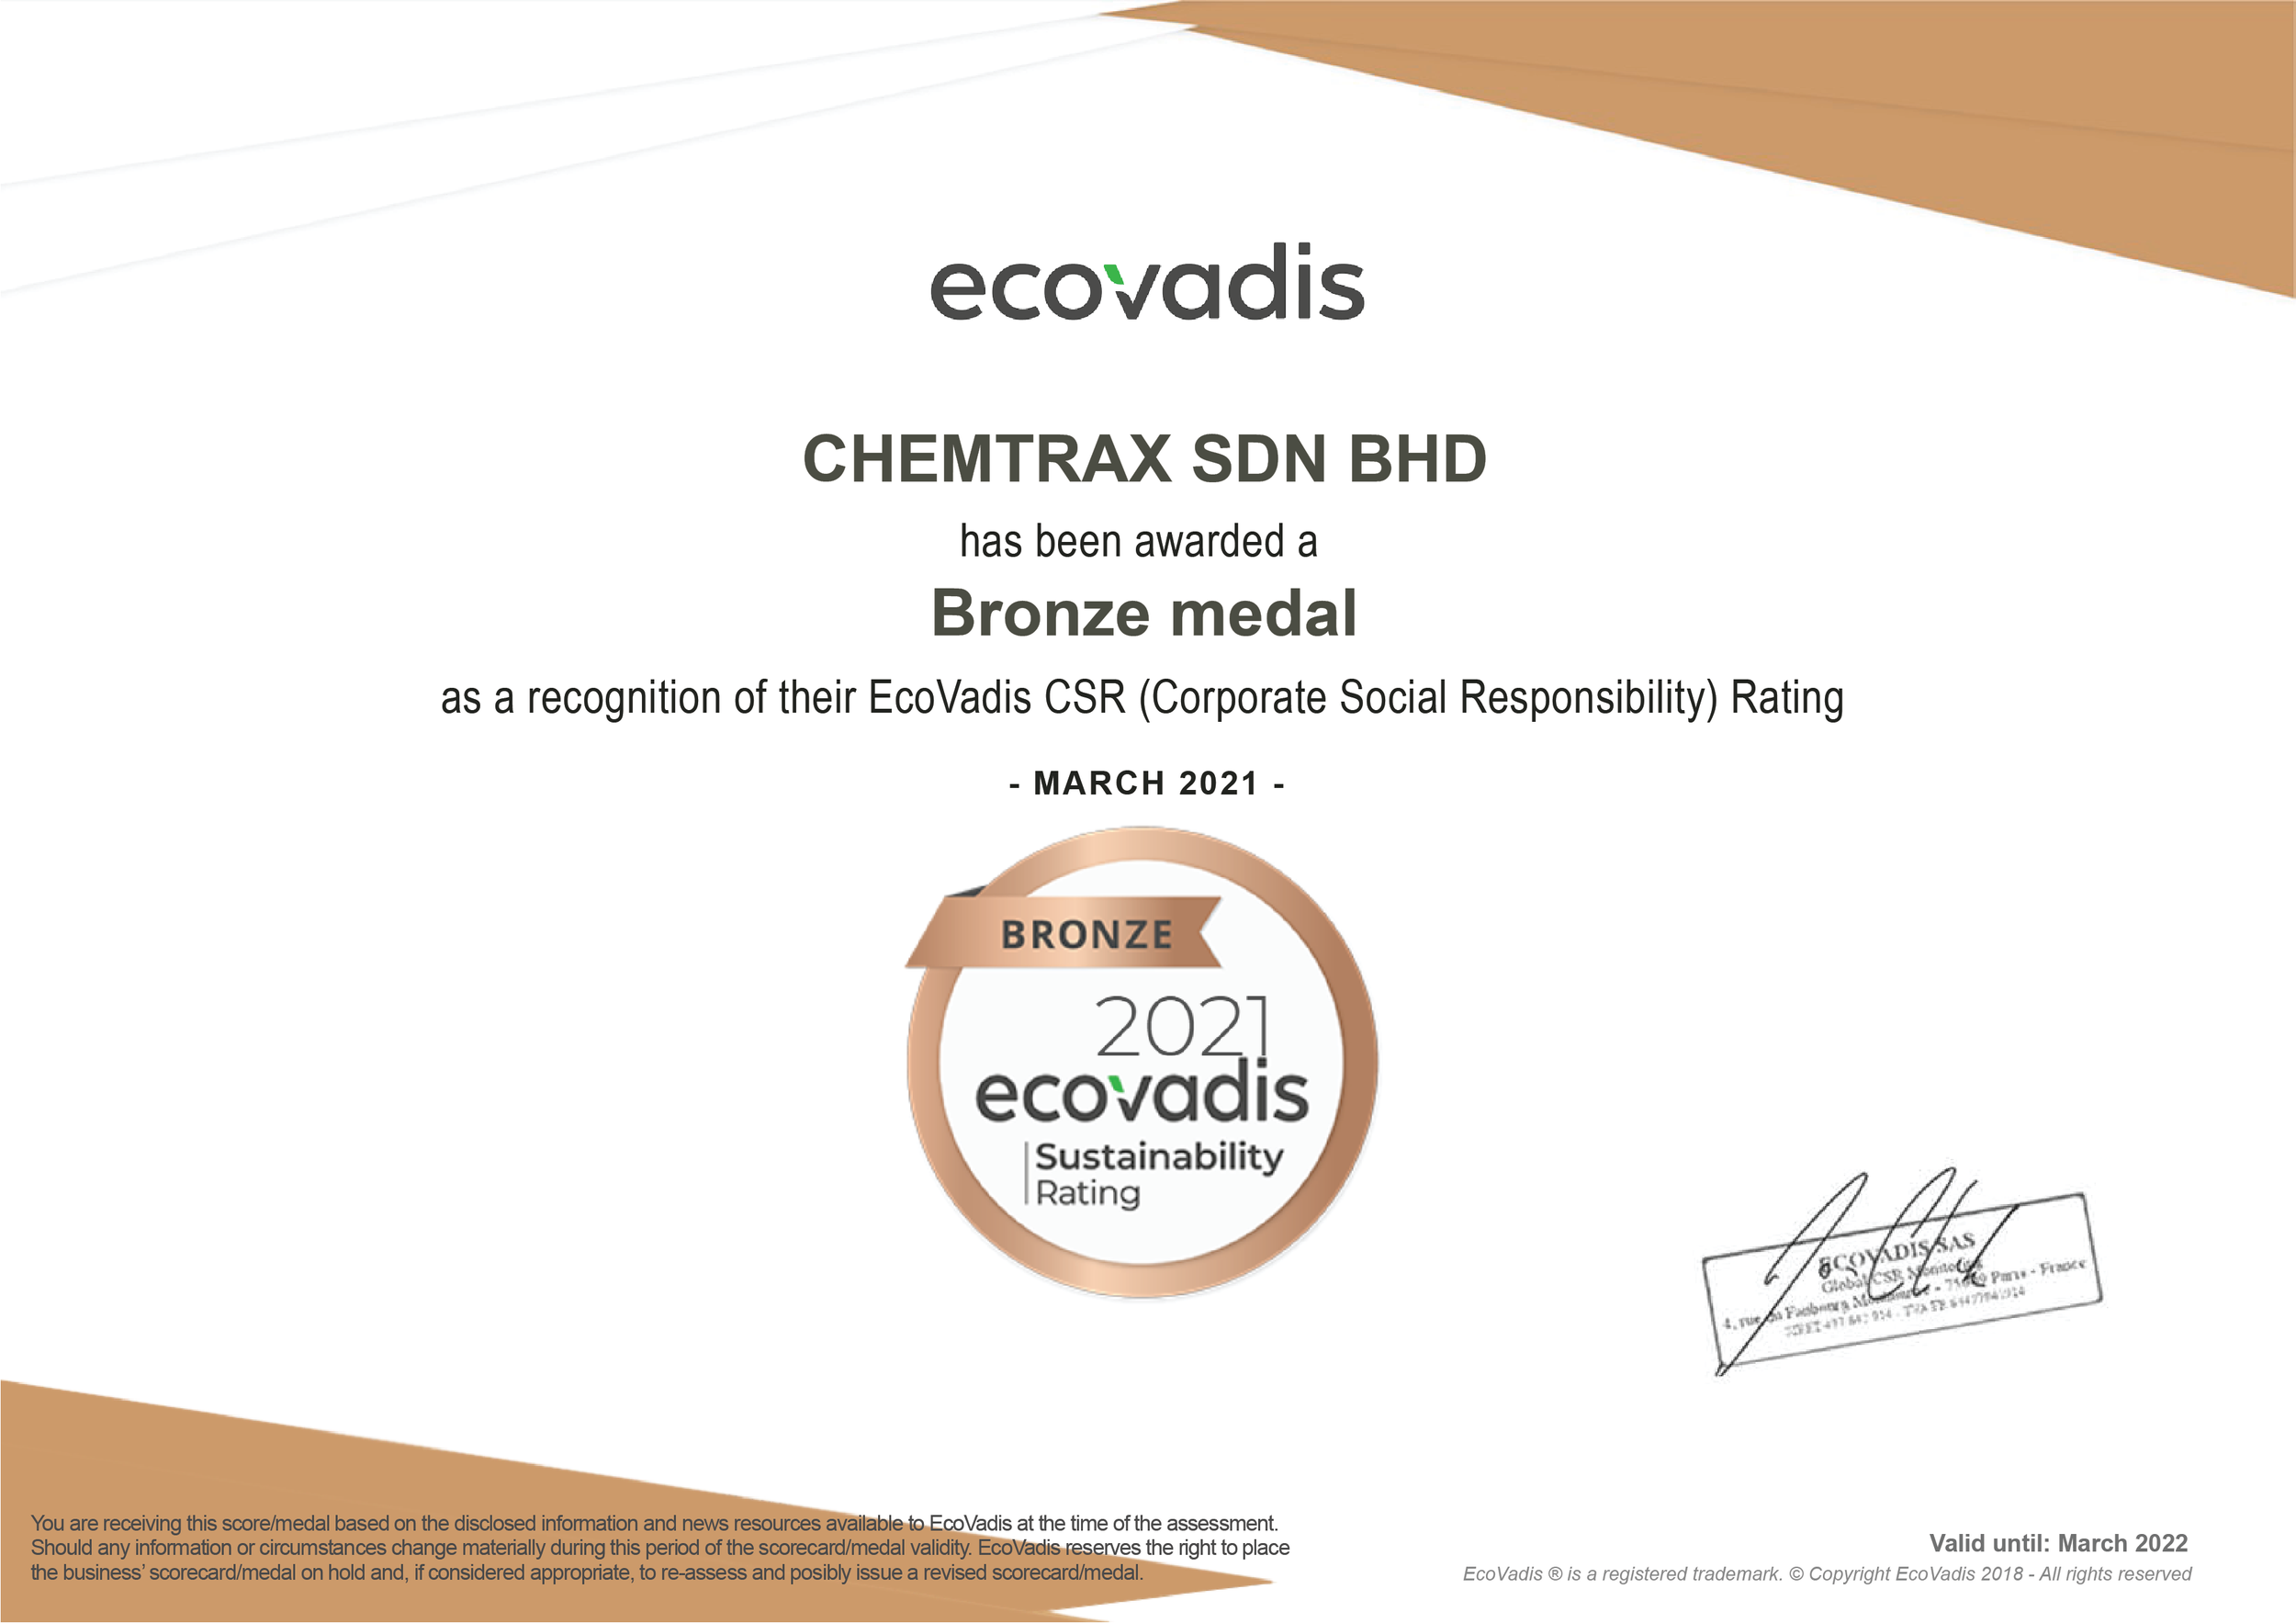 3. Certificate EcoVadis - CHEMTRAX SDN BHD.png